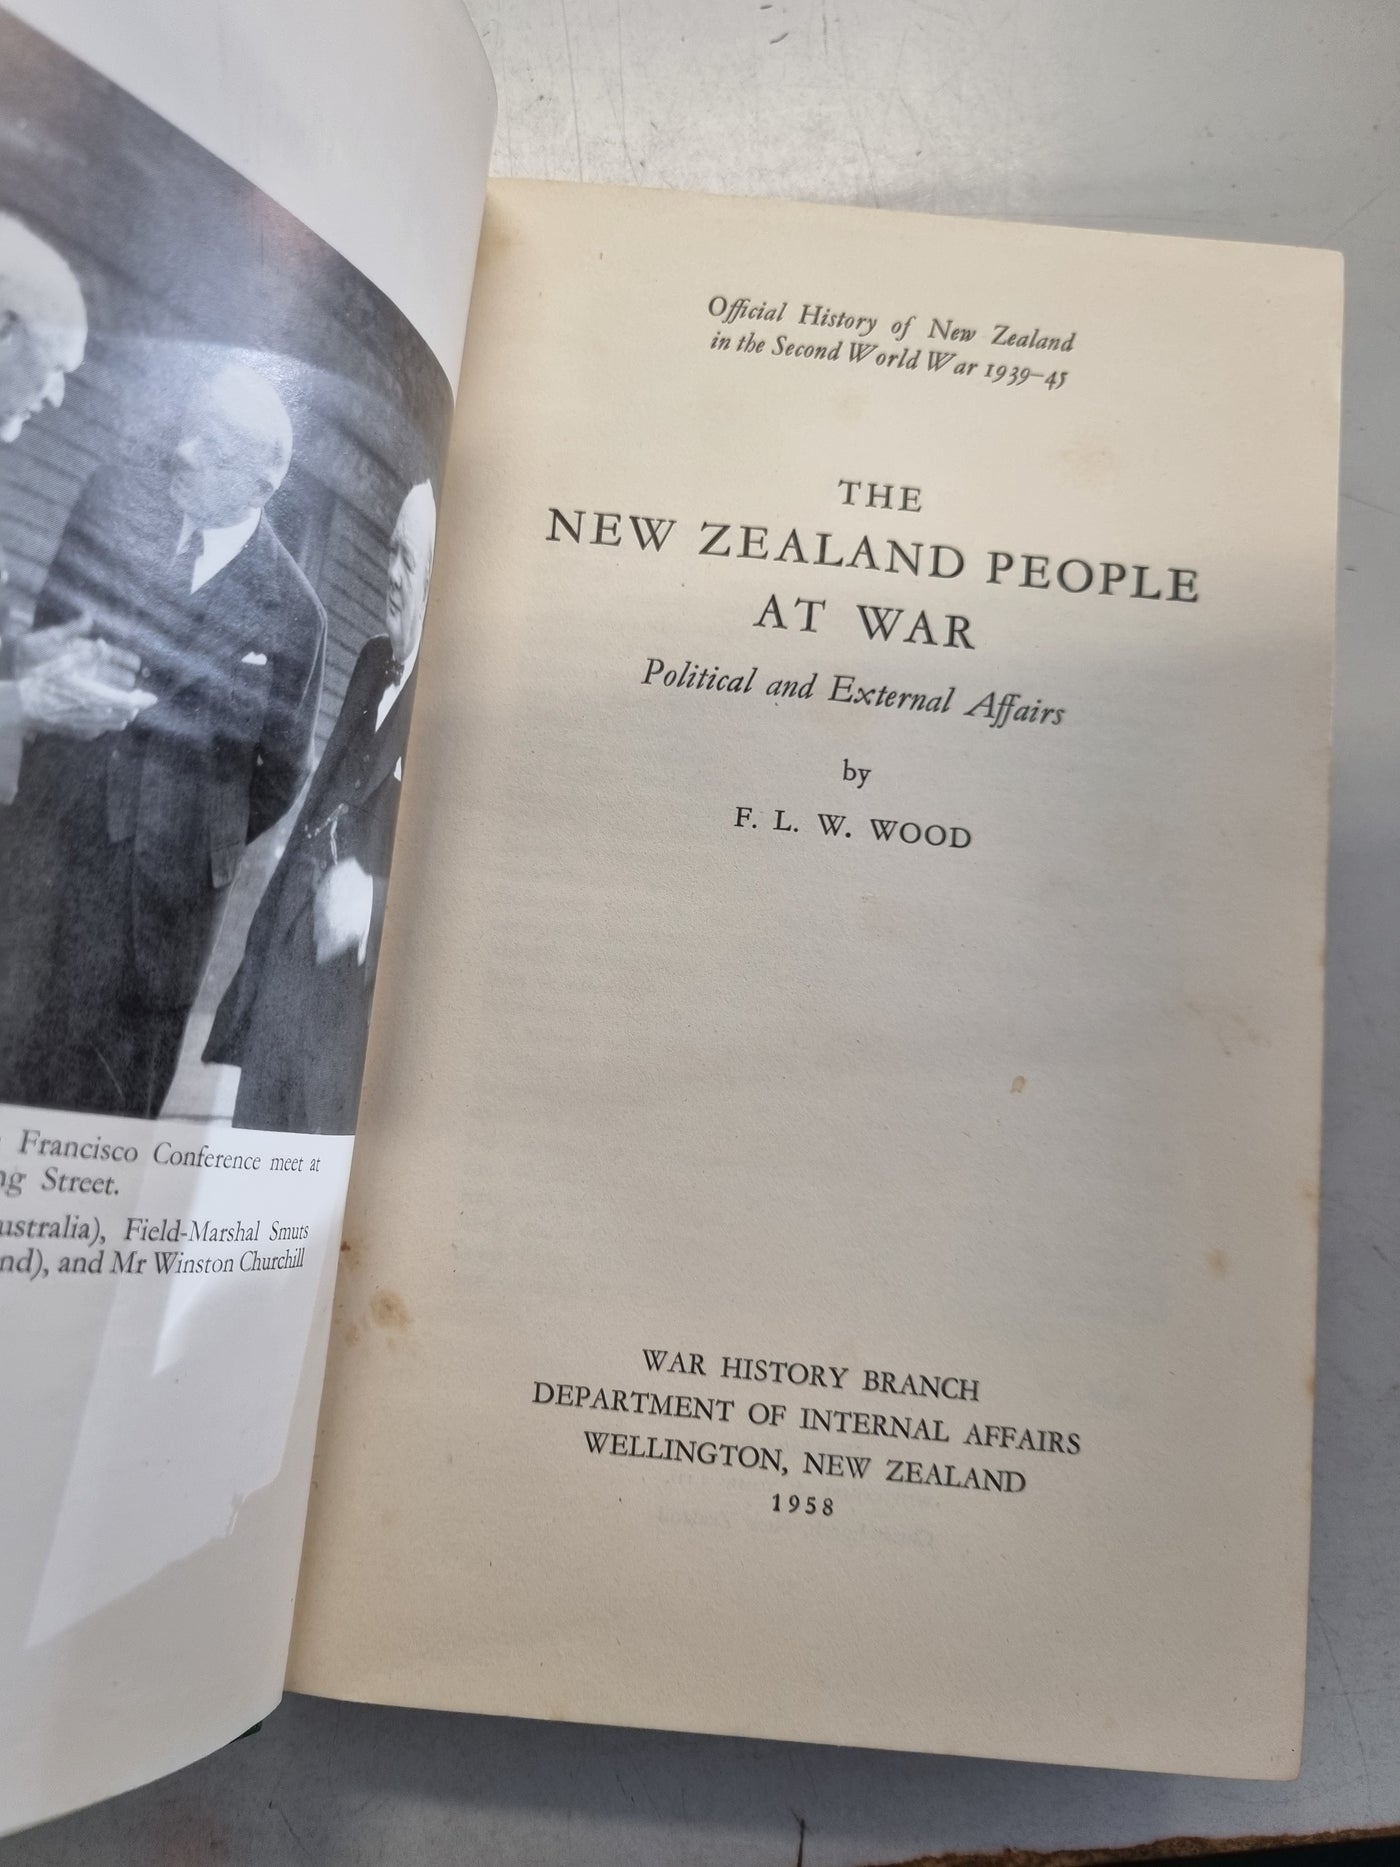 Official History of New Zealand In The Second World War: The People at War, Political and External Affairs